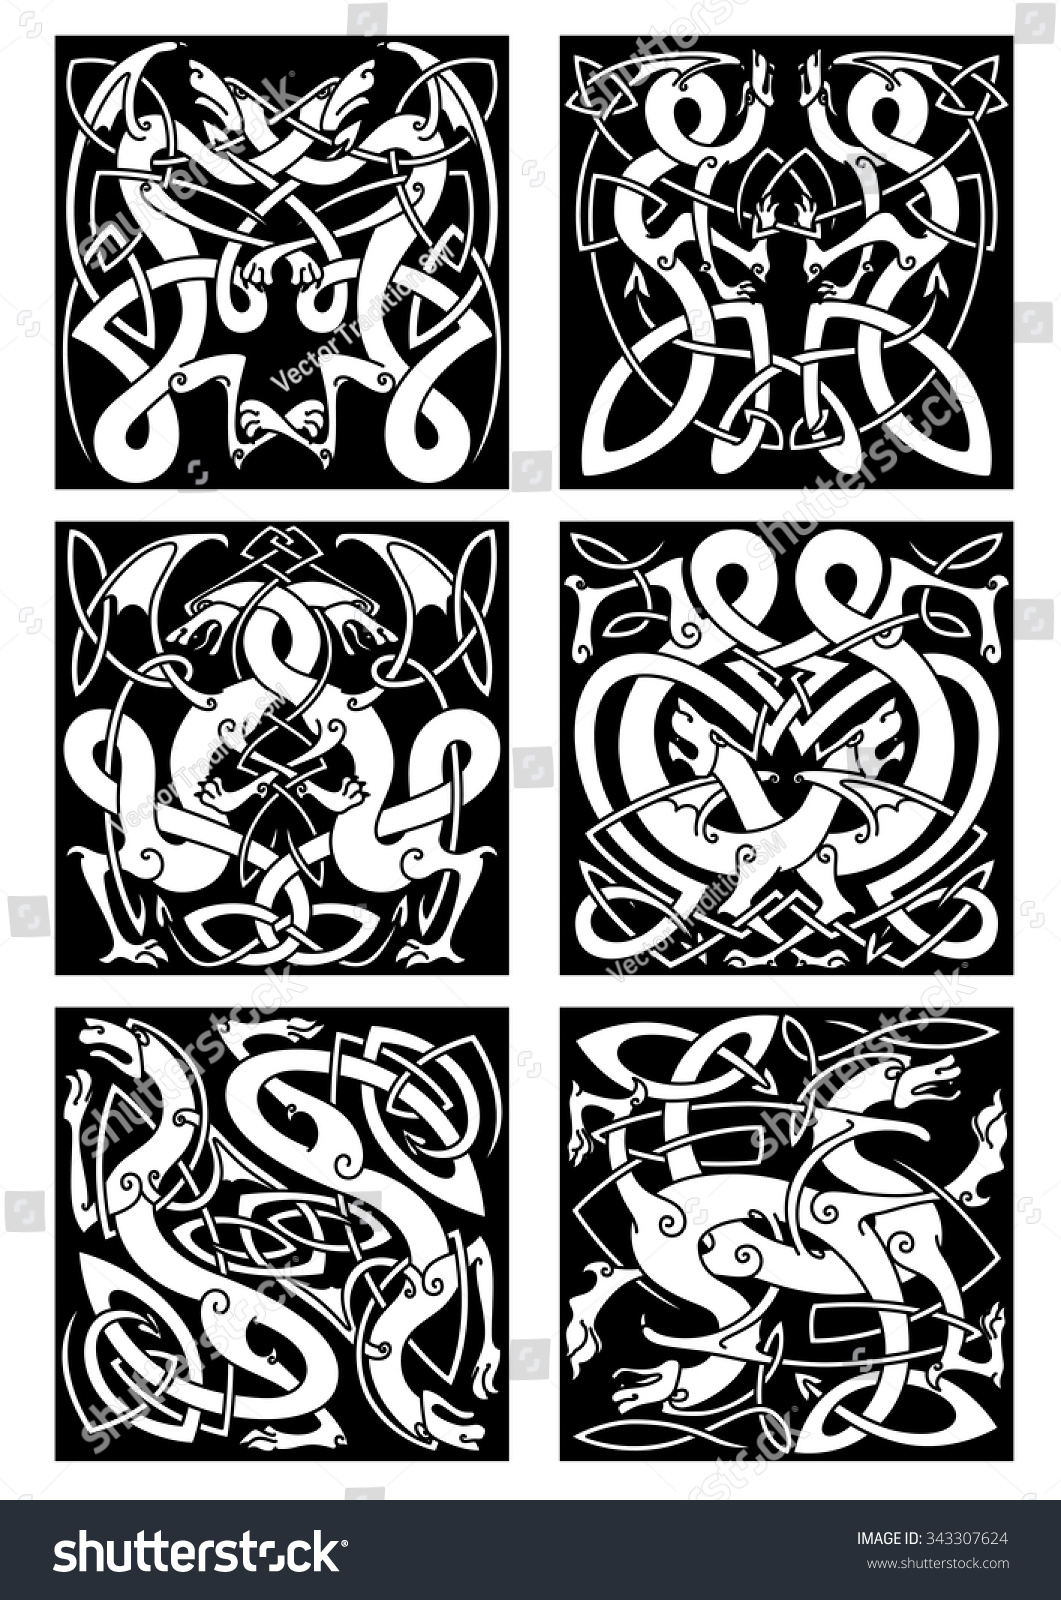 Medieval Celtic Knot Patterns Of Dragons With Entwined Wings And Tails ...